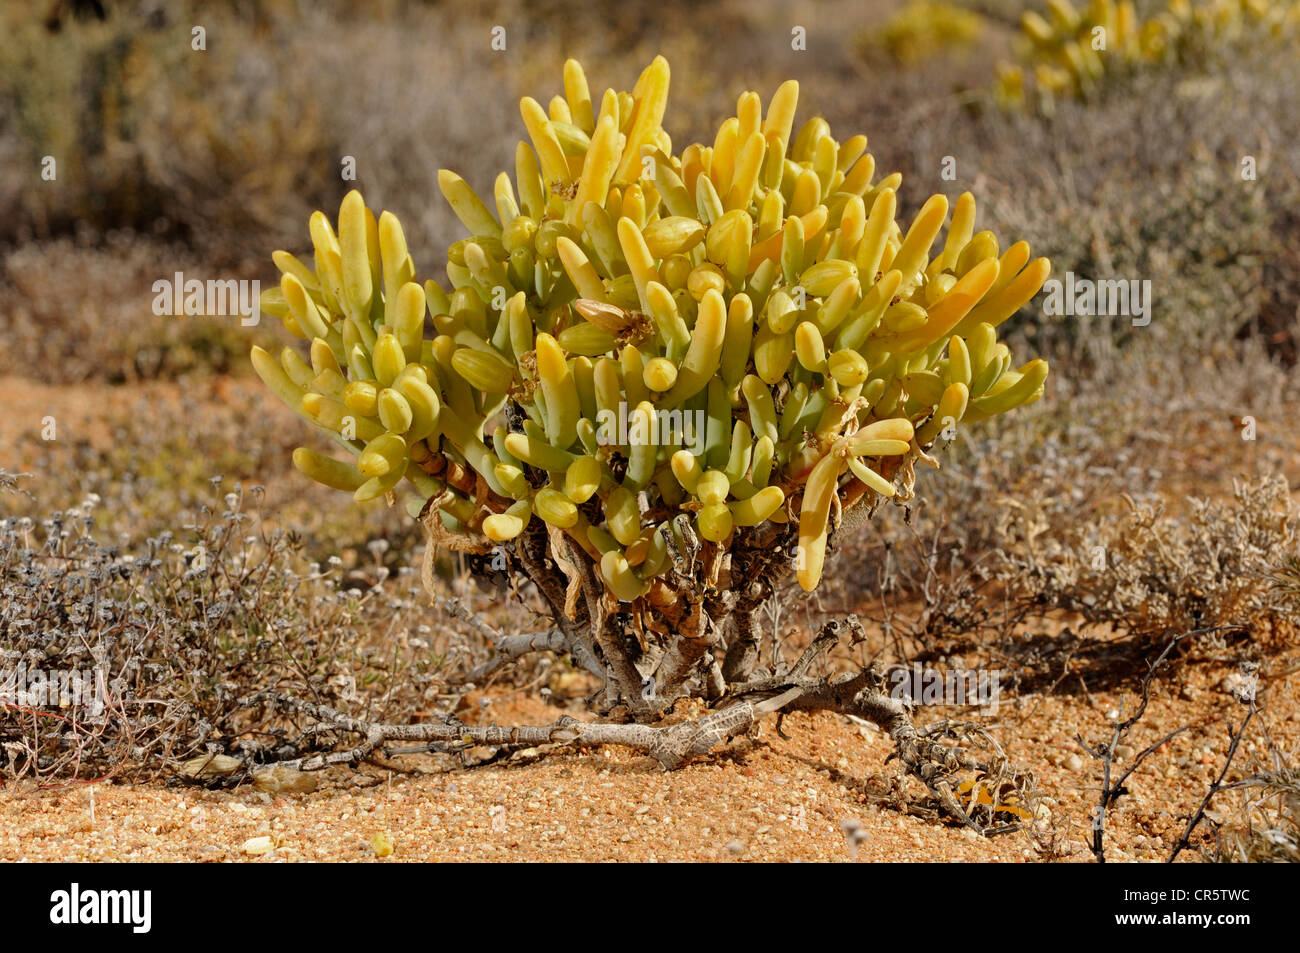 Augea capensis, Kinder-pieletjies with succulent leaves, Zygophyllaceae,  Nature Reserve, Namaqualand, South Africa, Africa Stock Photo